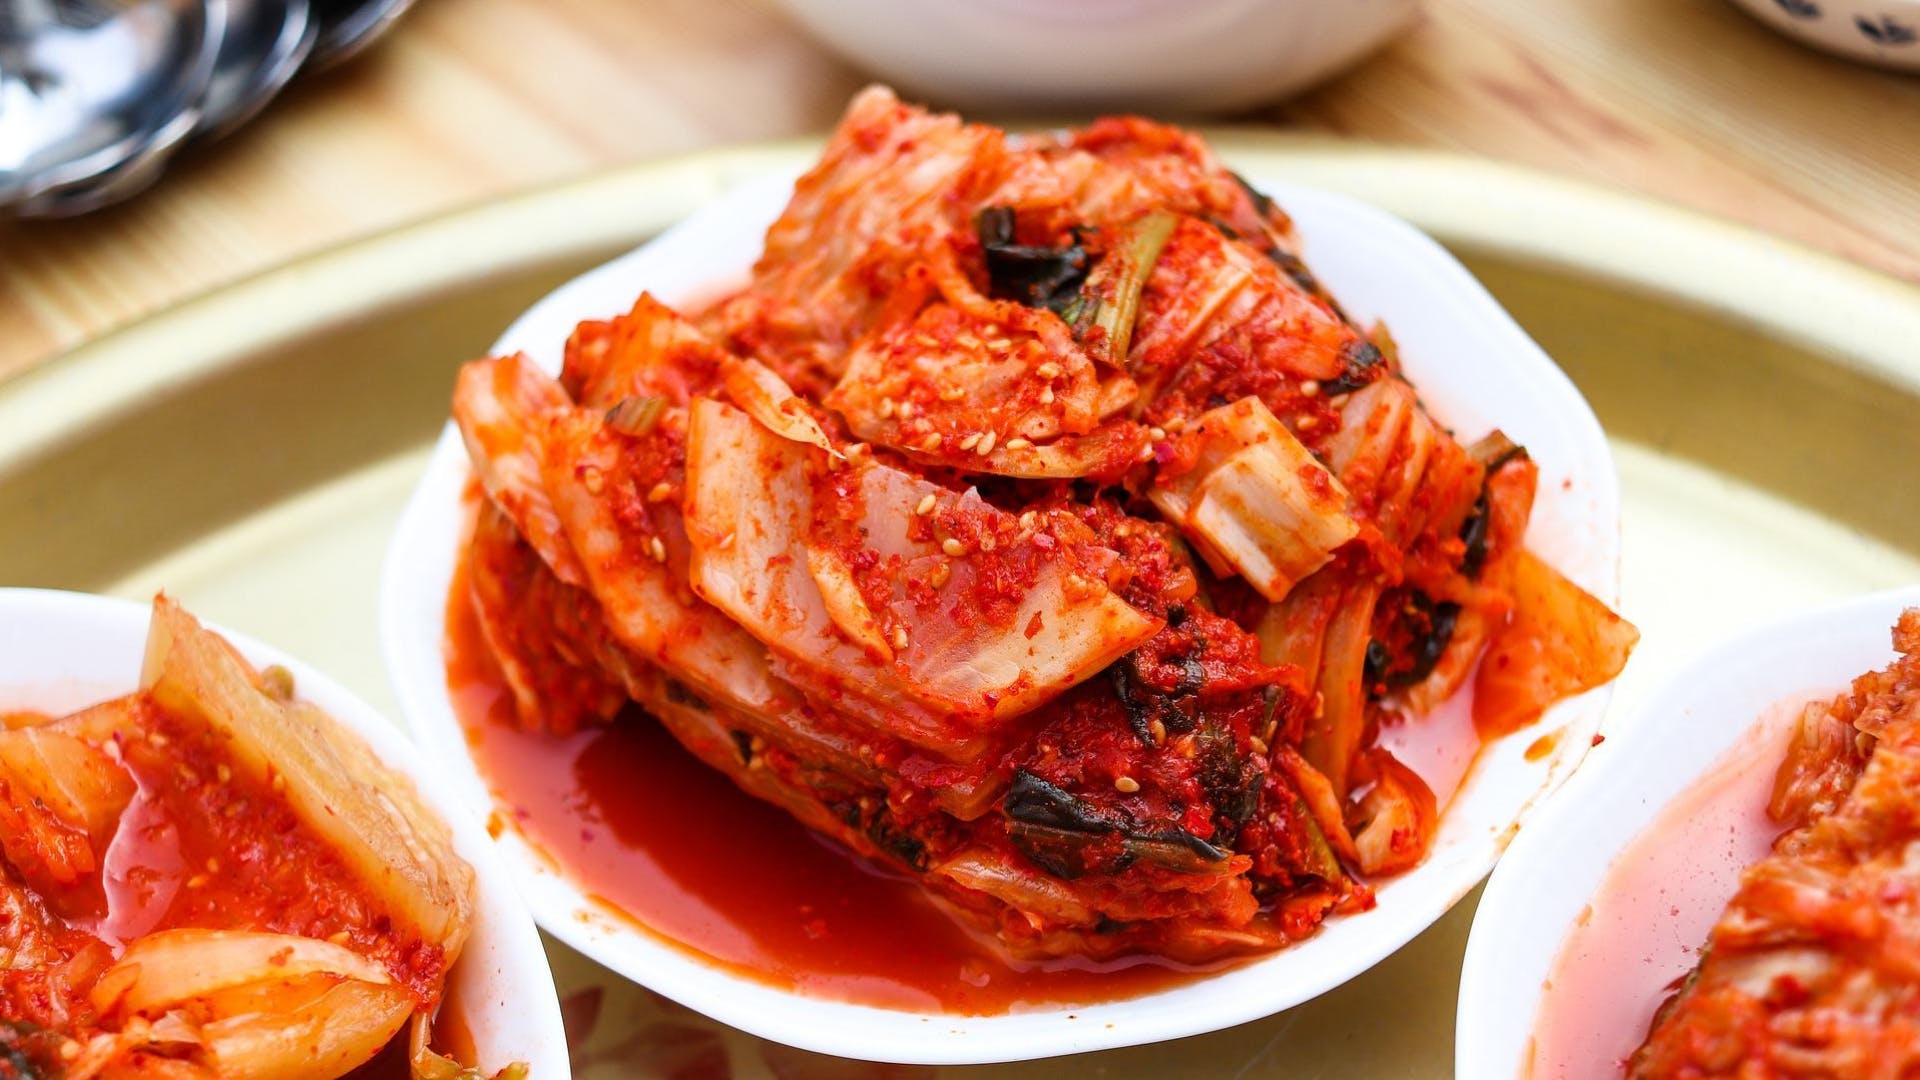 Dish,Food,Cuisine,Ingredient,Kimchi,Meat,Side dish,Produce,appetizer,Jeotgal